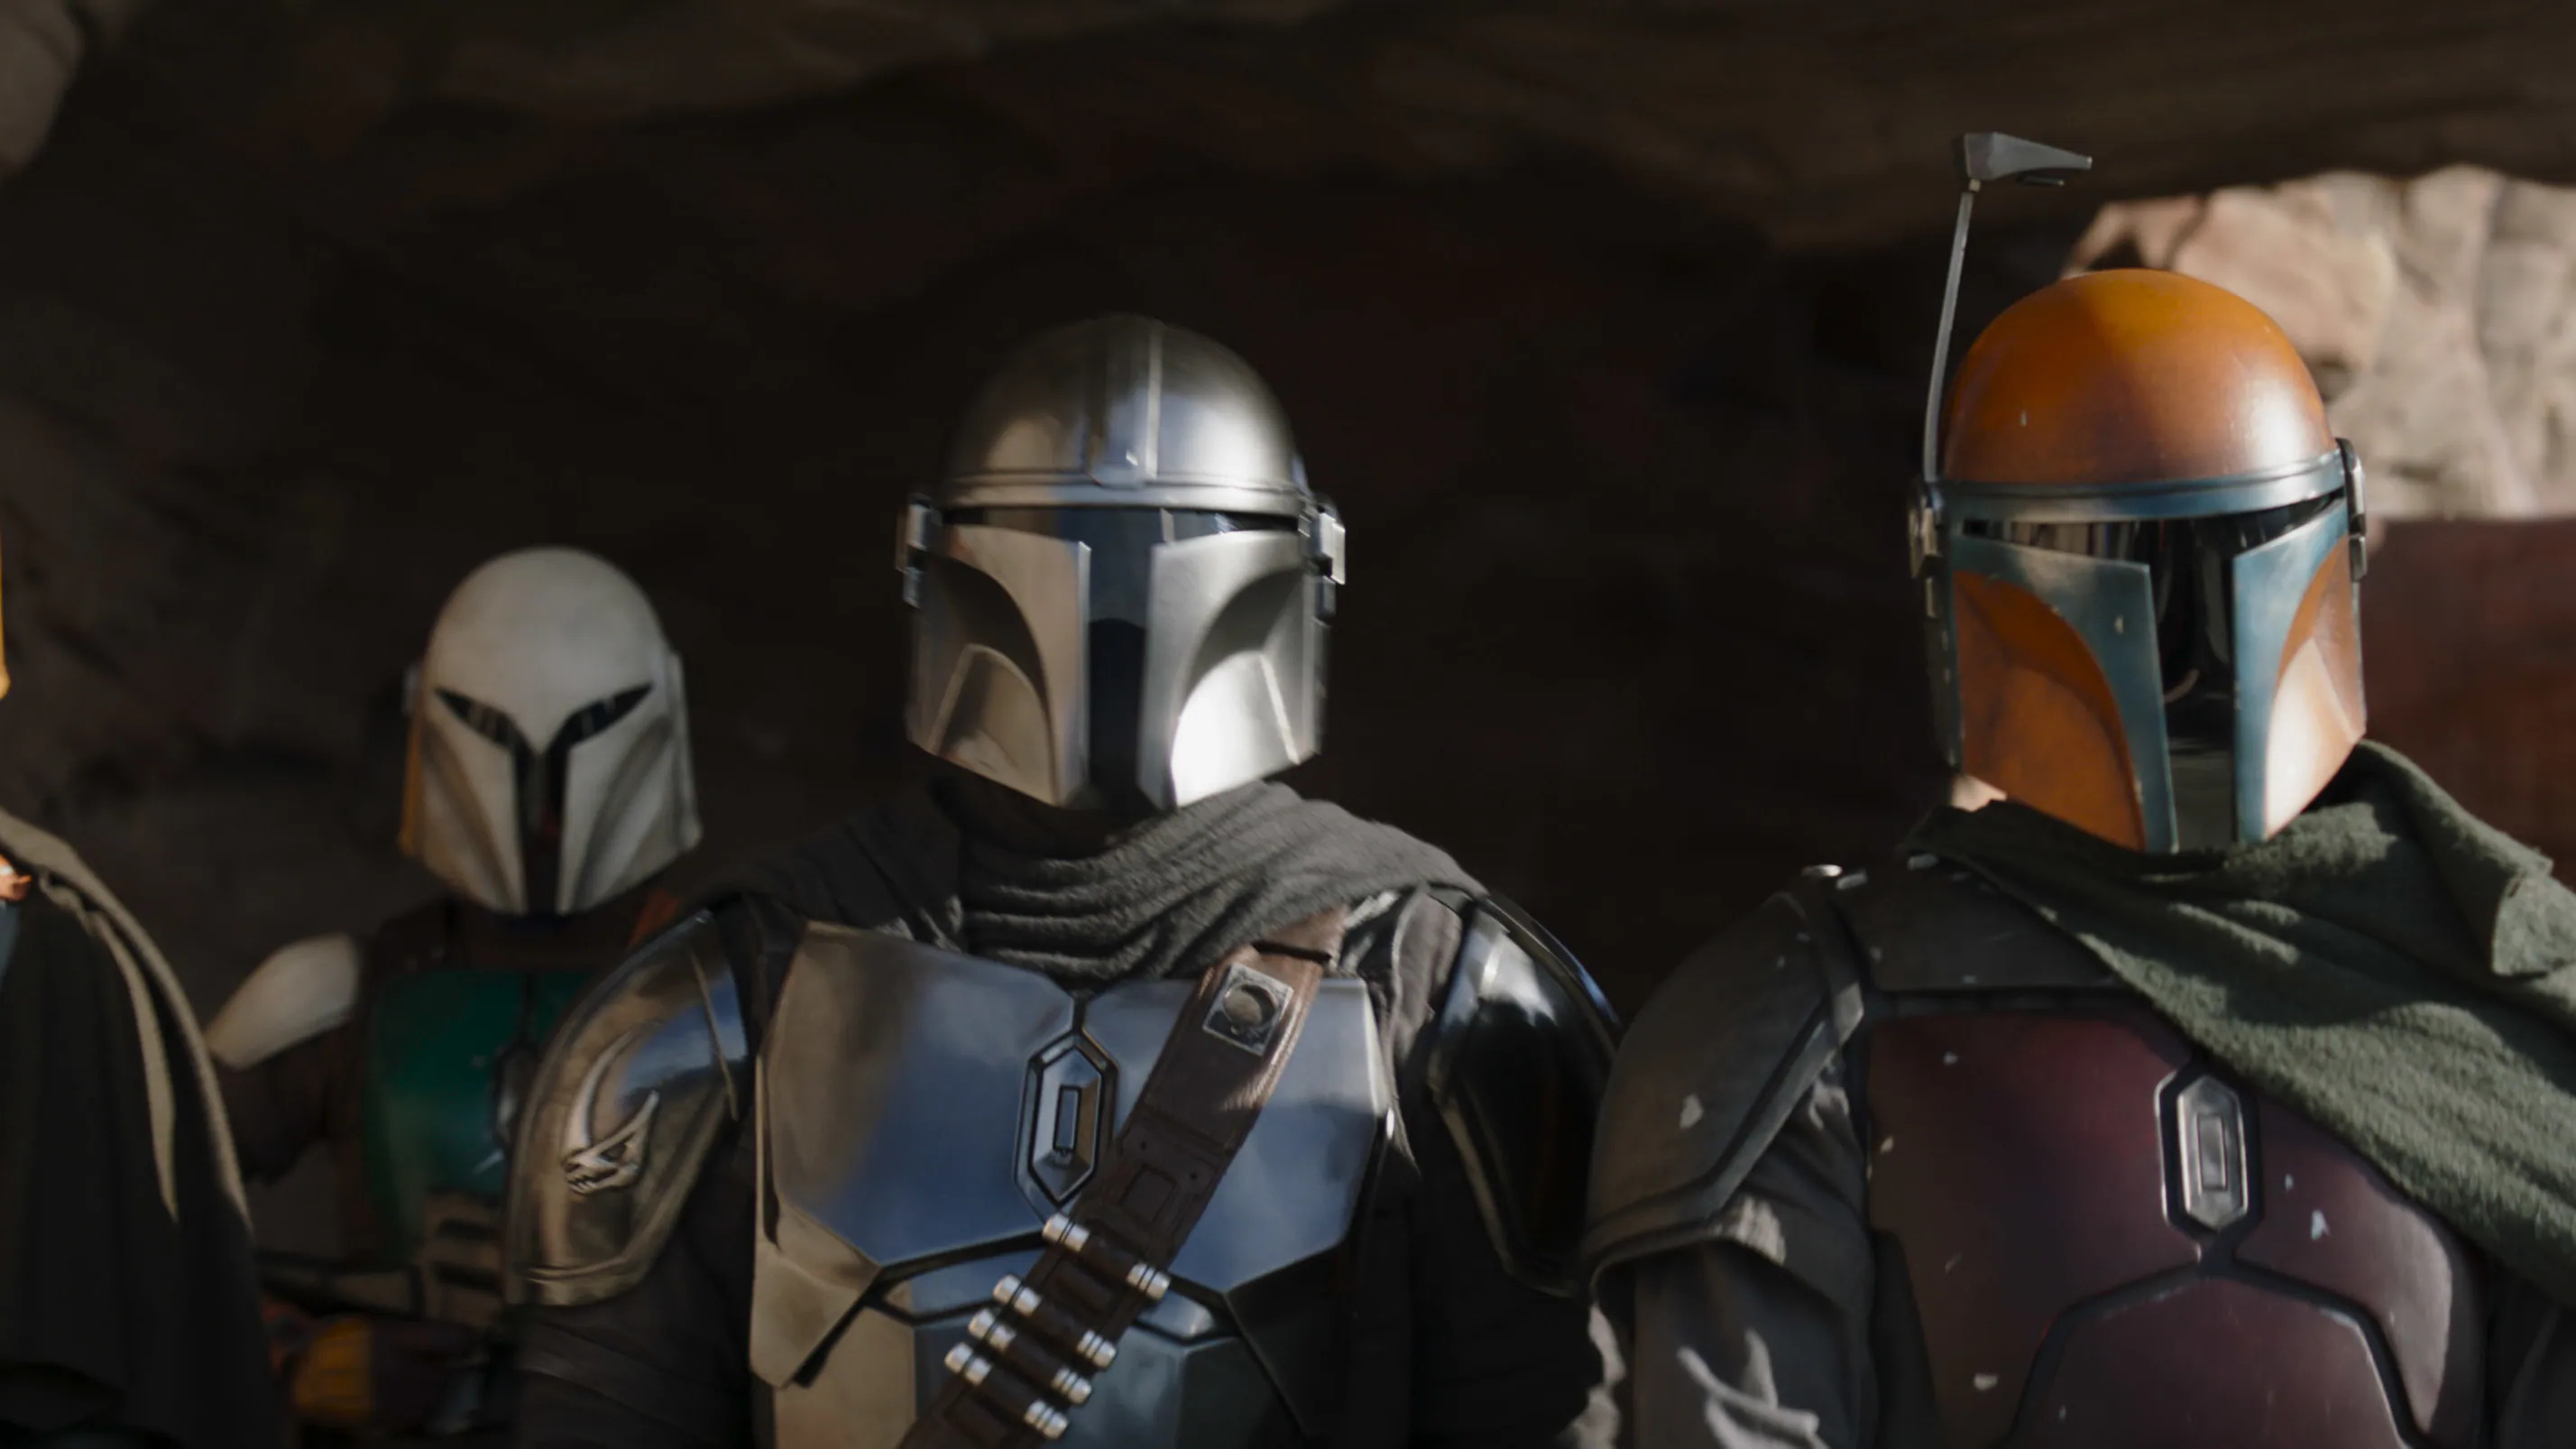 A shot from the TV show The Mandalorian shows three Mandalorian fighters in their distinctive helmets and armor, with a variety of weapons.